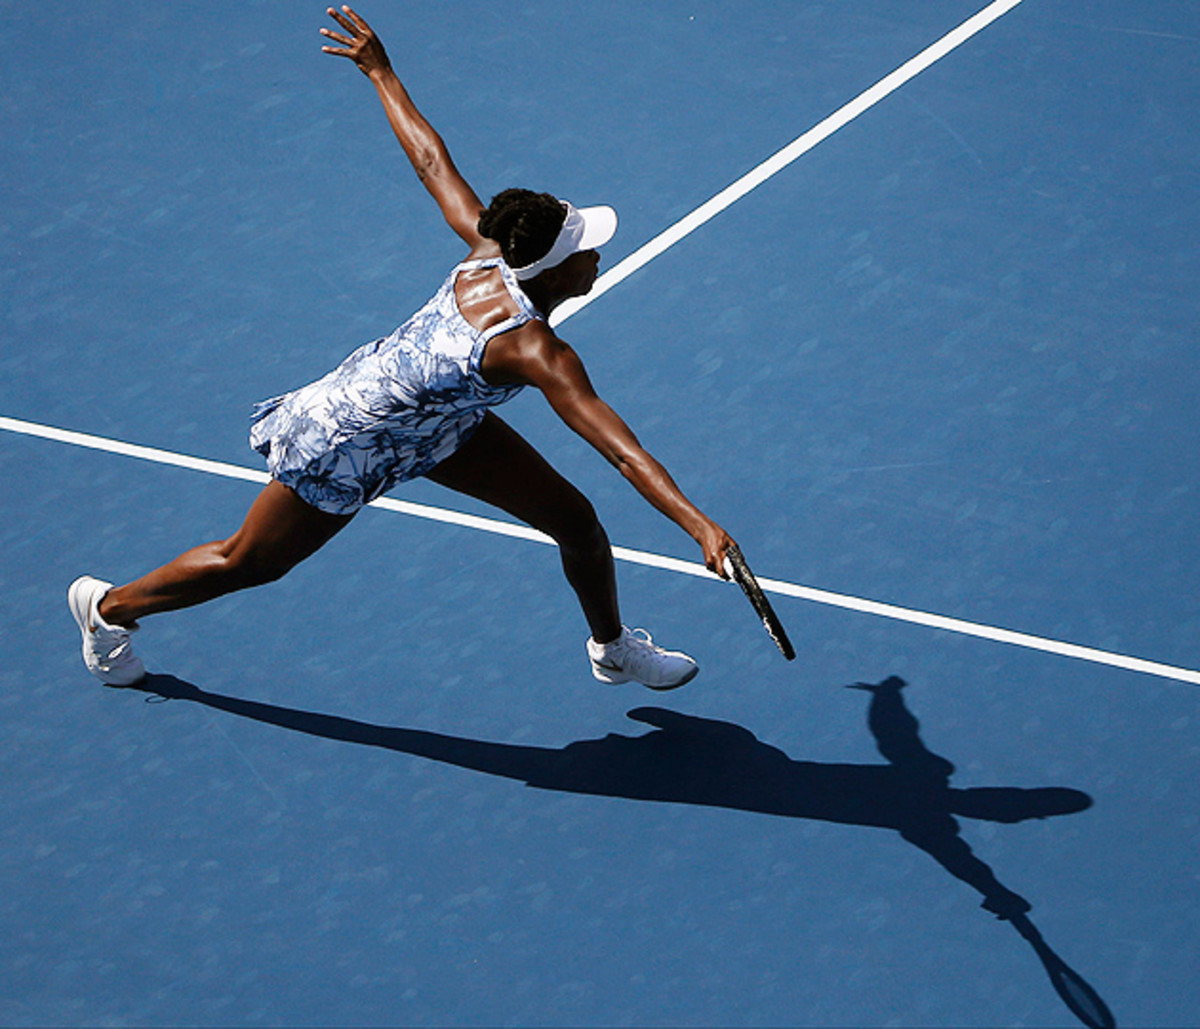 Venus Williams improved her head-to-head record against Kimiko Date-Krumm to 4-0.